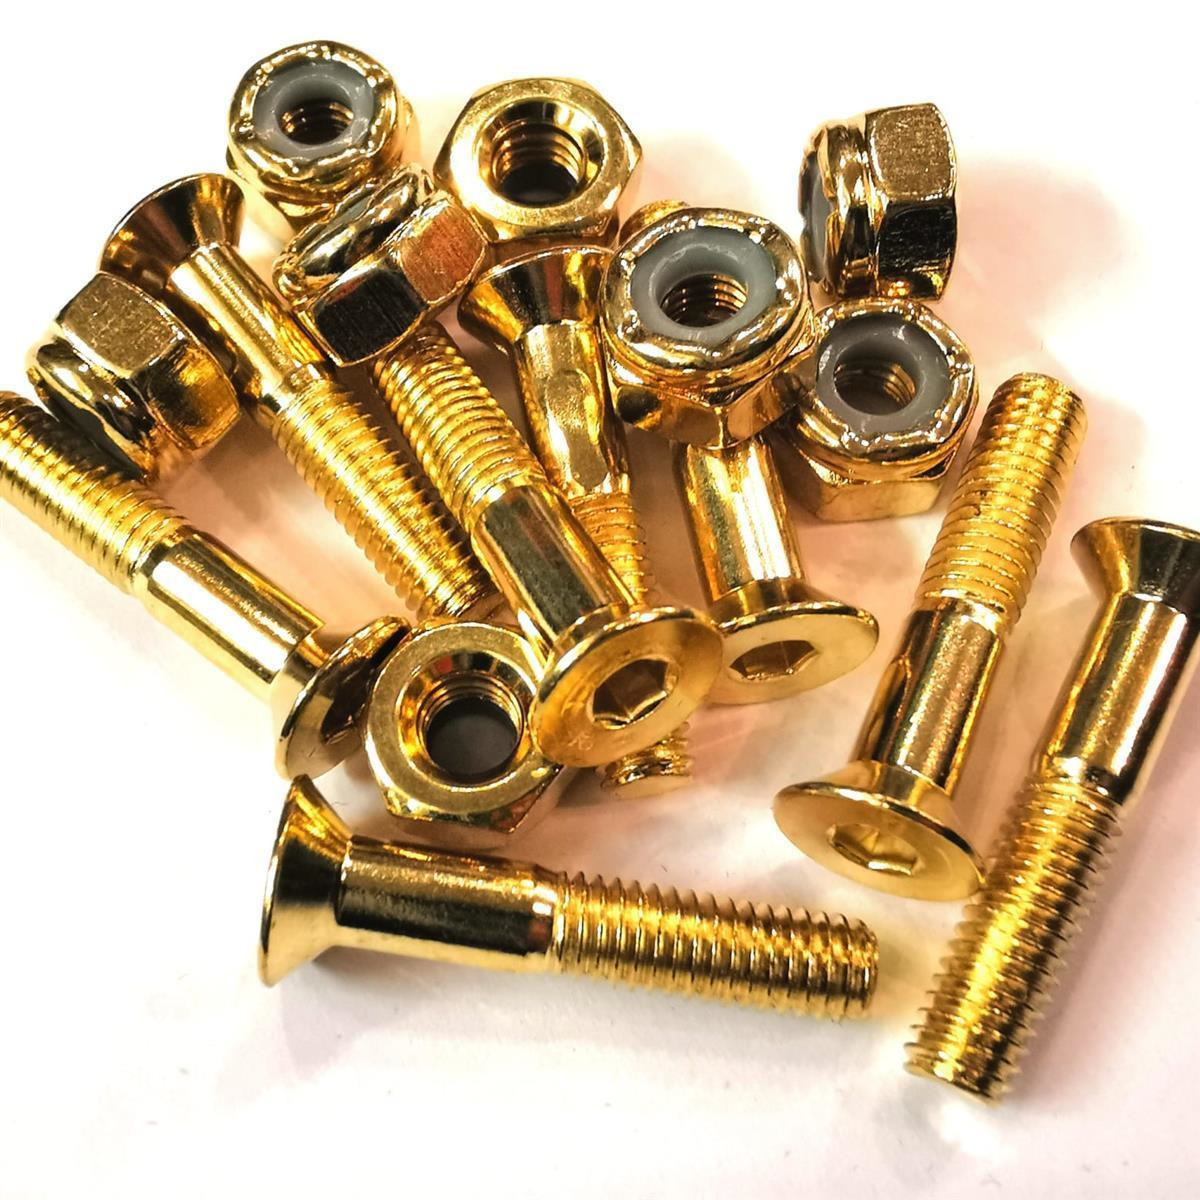 Montagesatz gold 1 1/4" inbus nuts and bolts